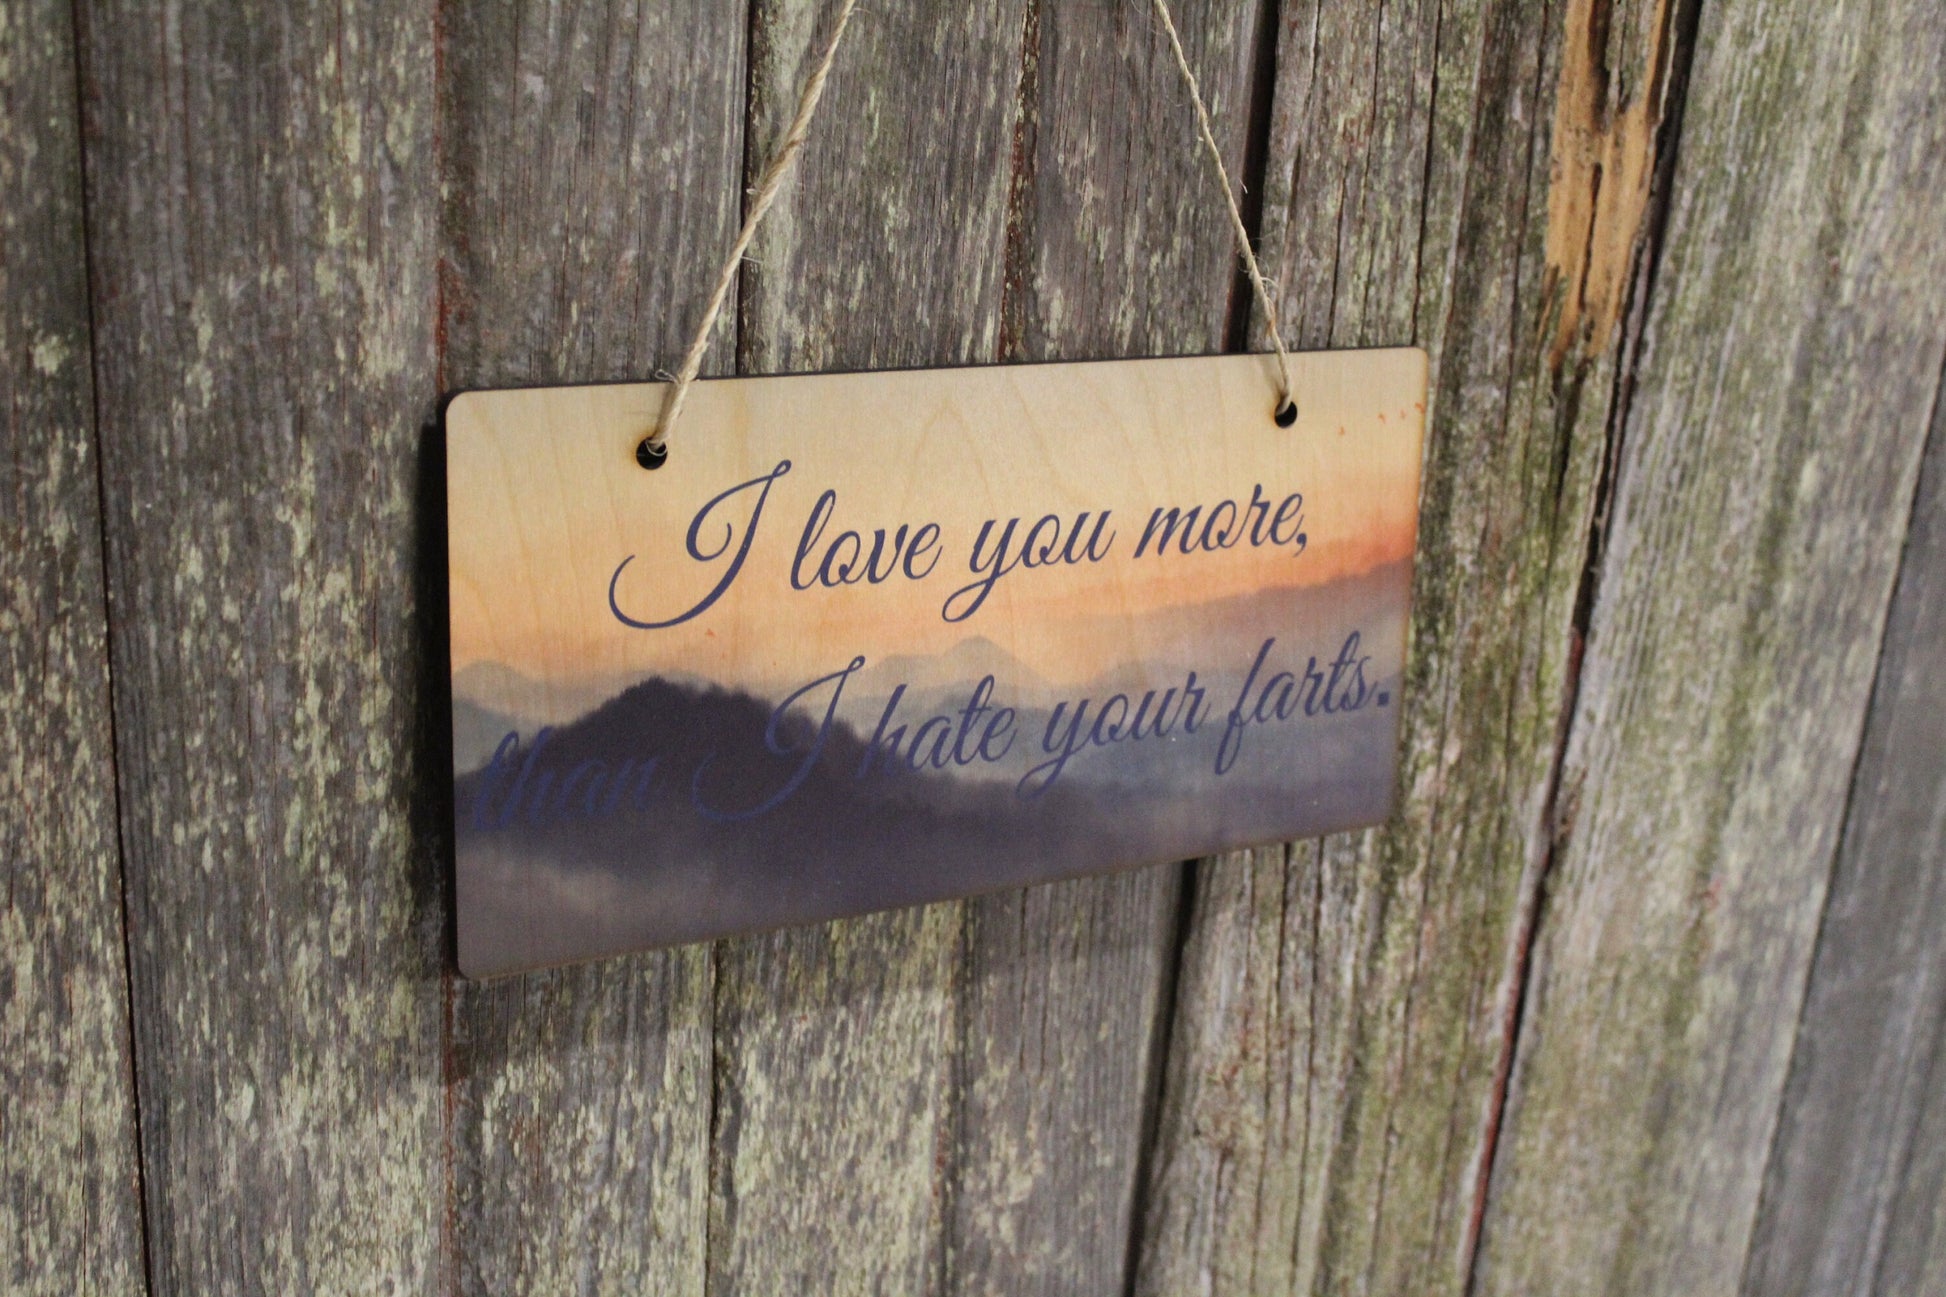 Funny I love you Wood Sign more than I hate your farts Joke Wood Mountain Scene Guy Gift Boyfriend Gift Silly Sunset Goofy